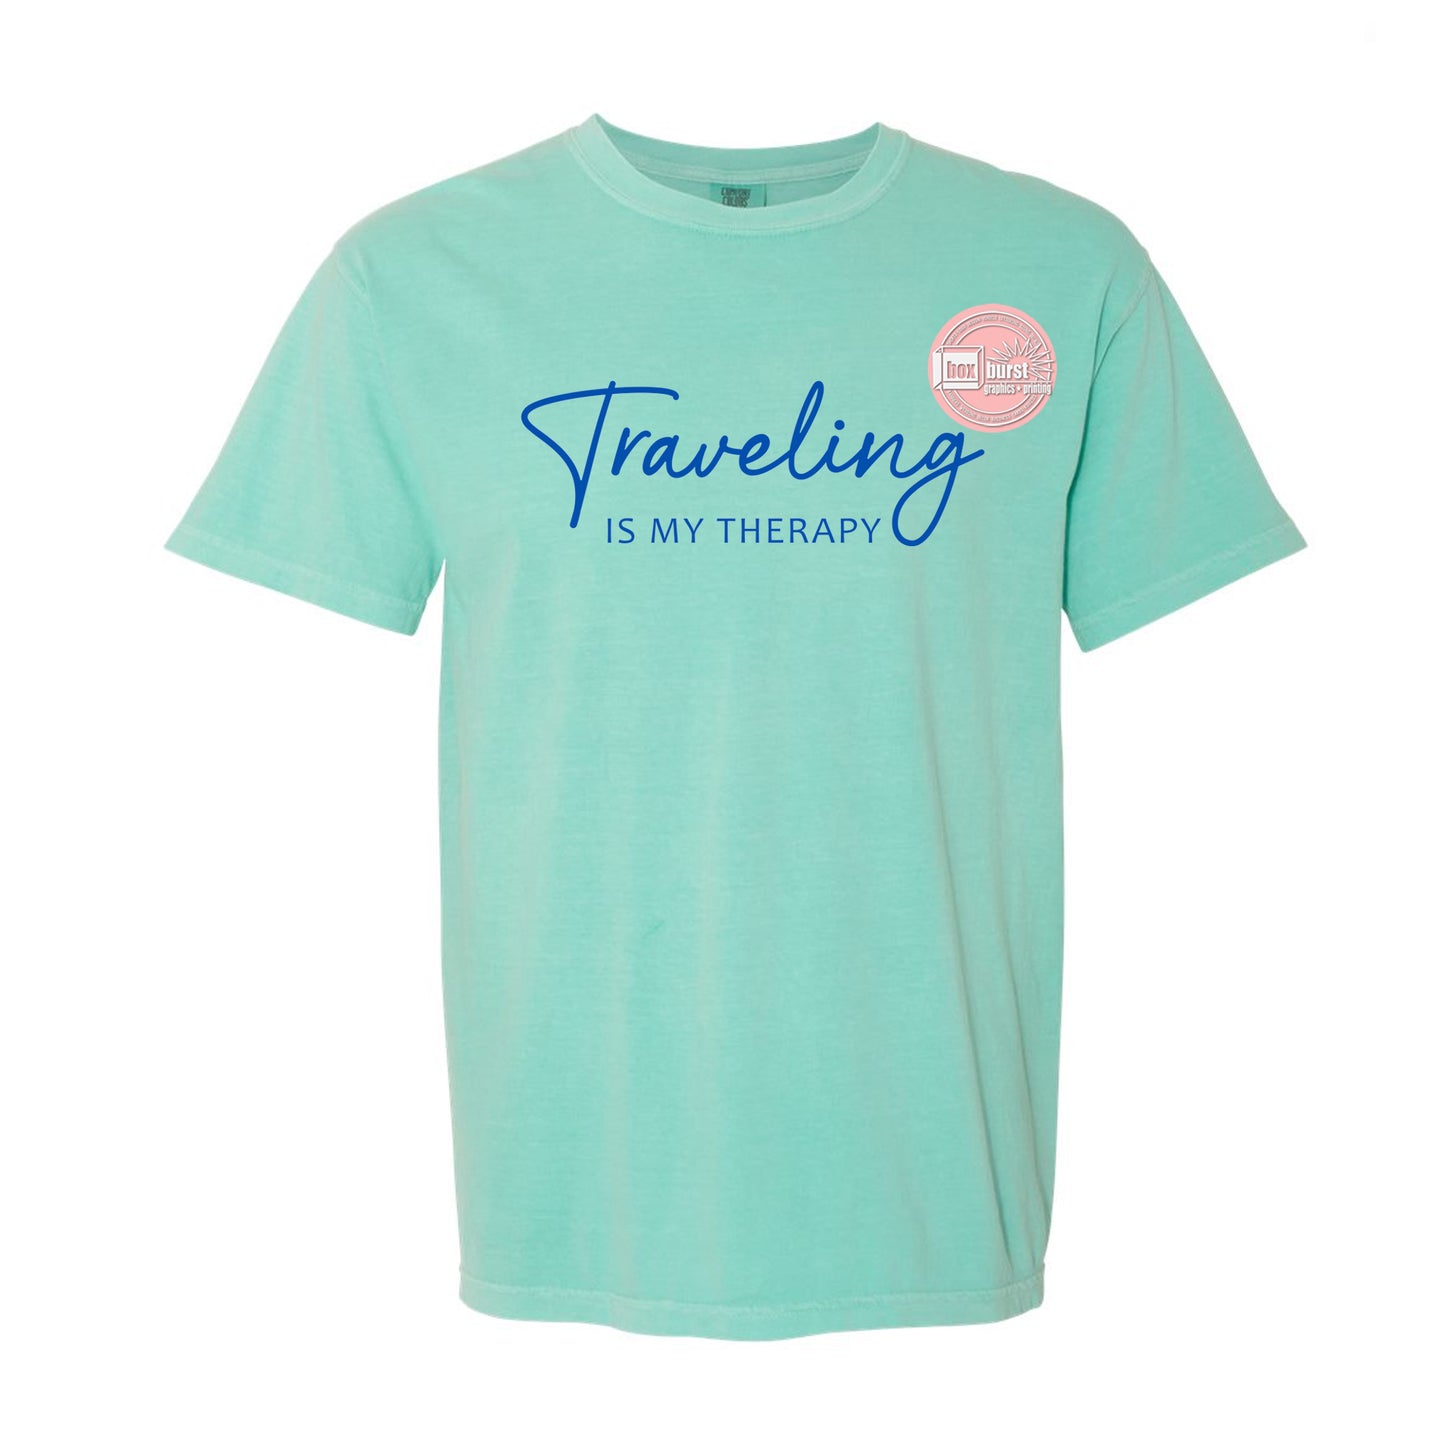 Traveling is my therapy t-shirt